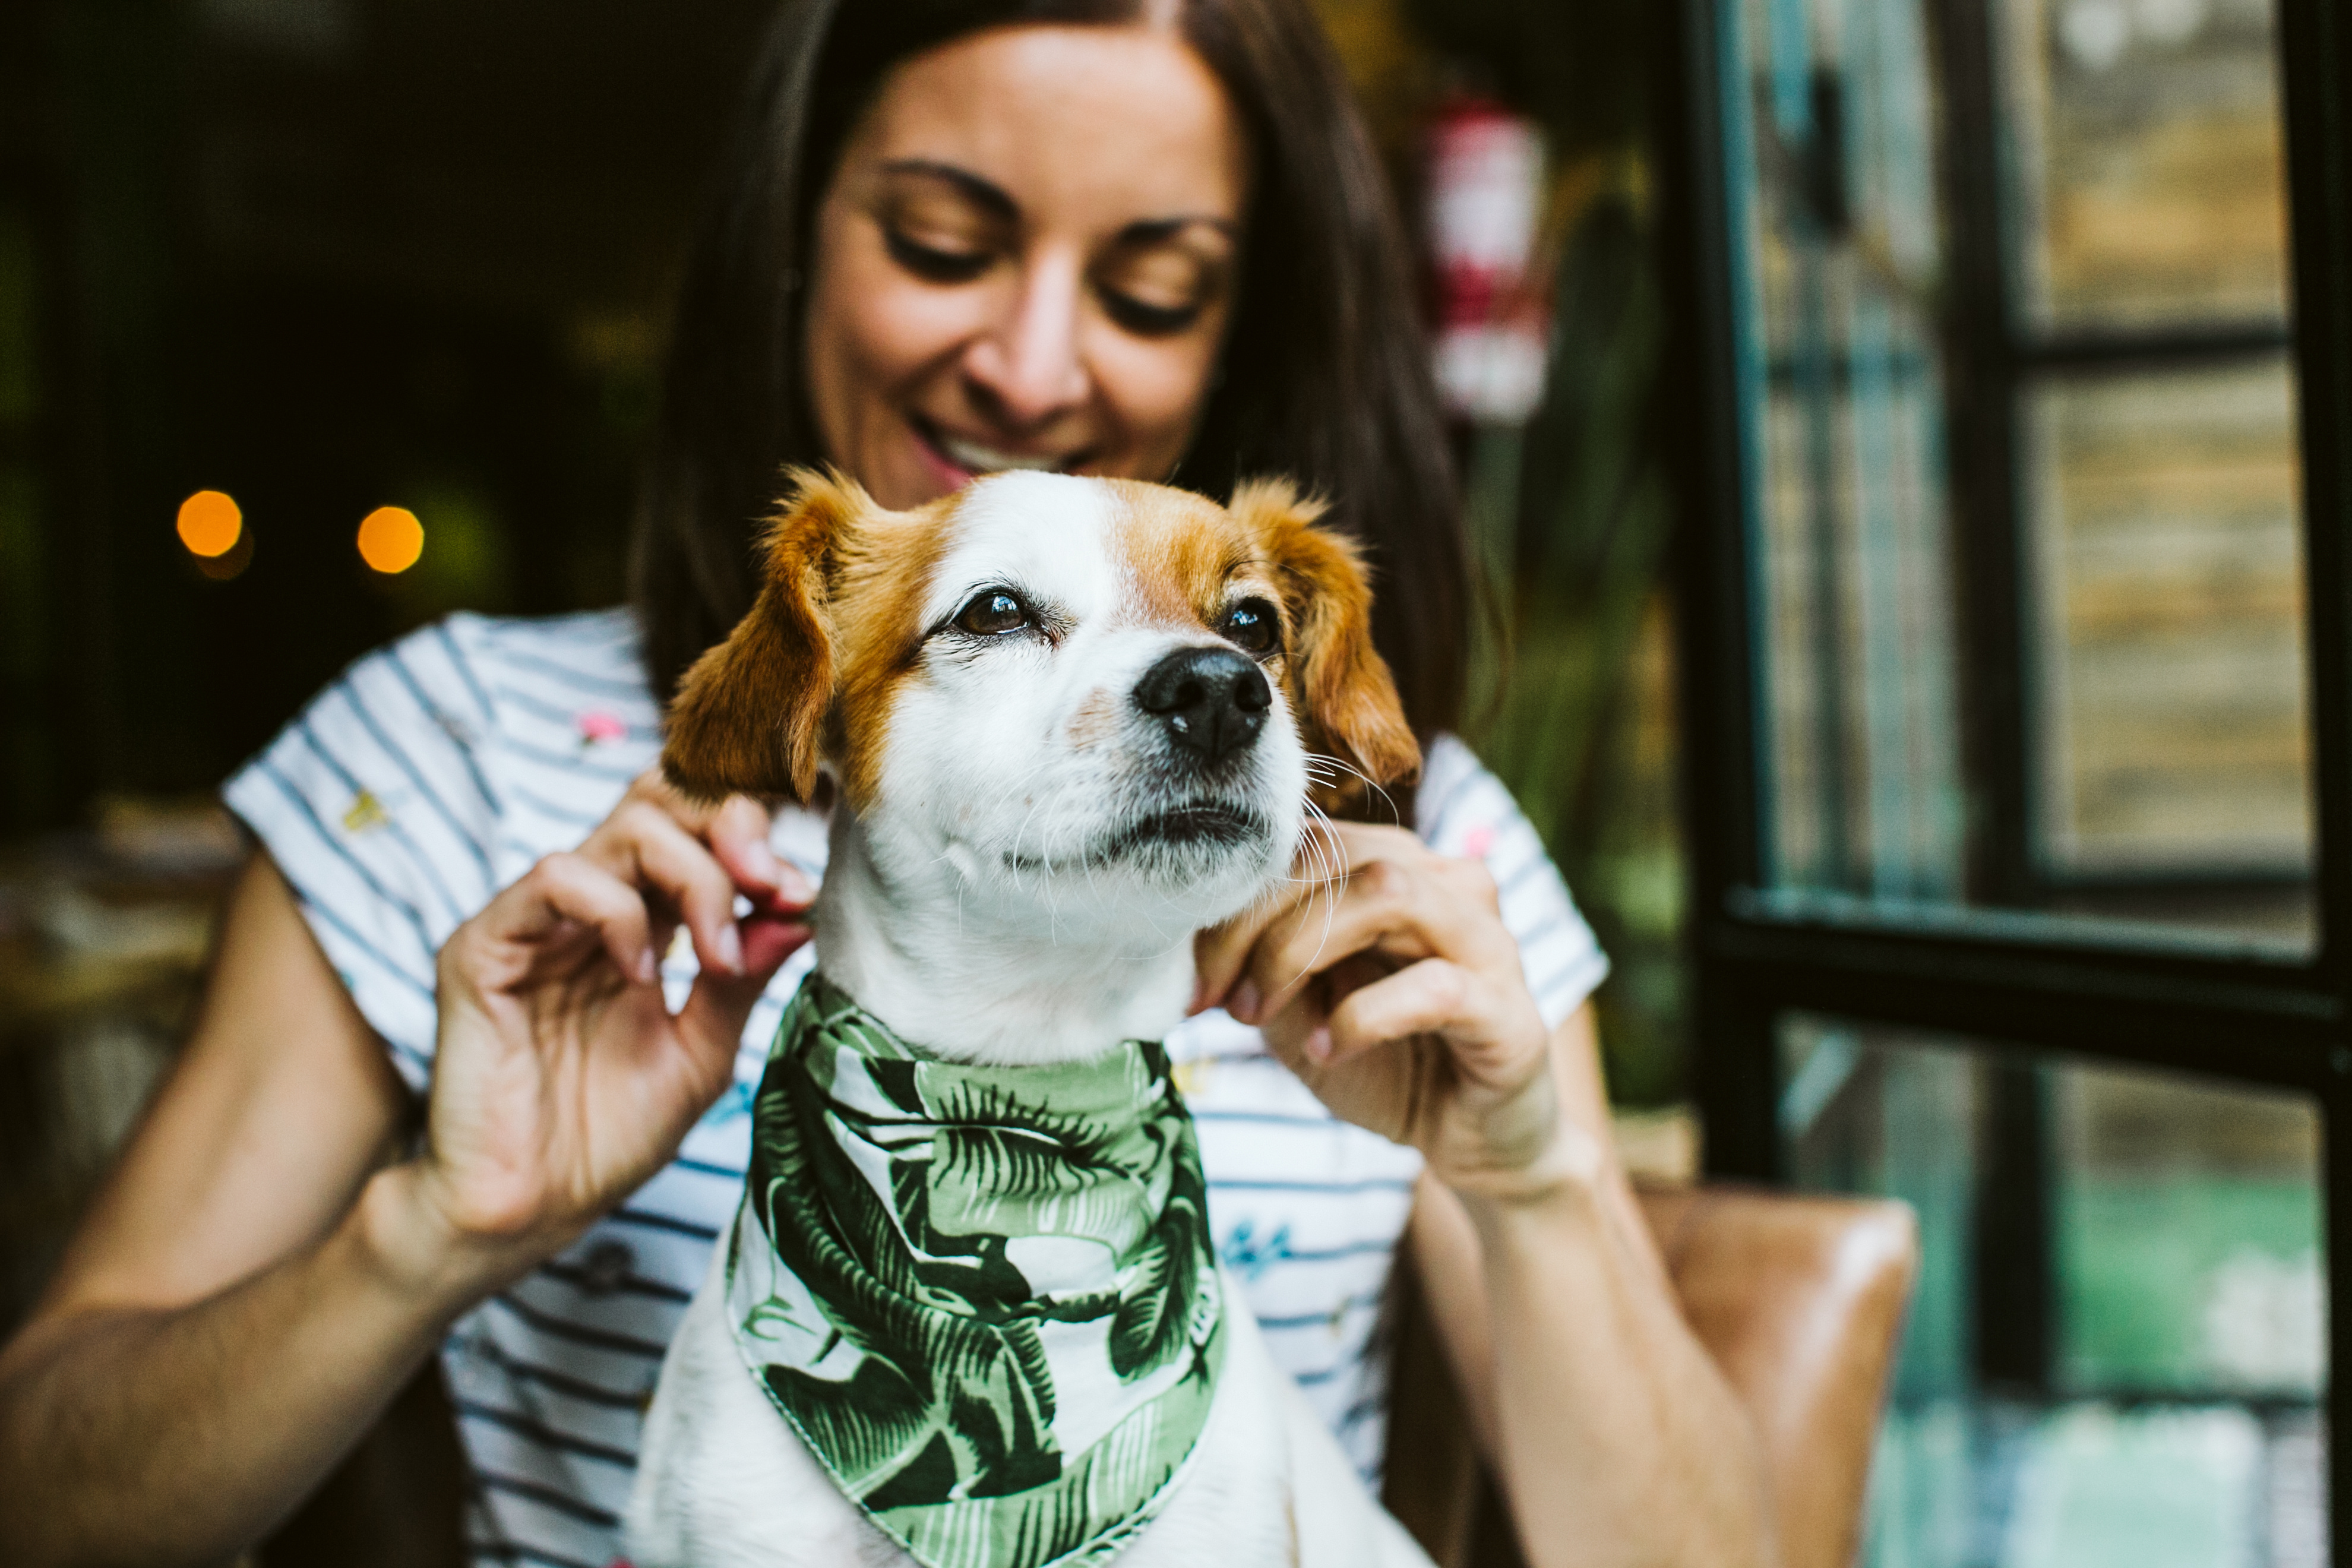 A well trained dog waits while its owners finish a meal at a dog-friendly restaraunt - contact Dog Training Elite in Gilbert, AZ to discuss dog training options for you!